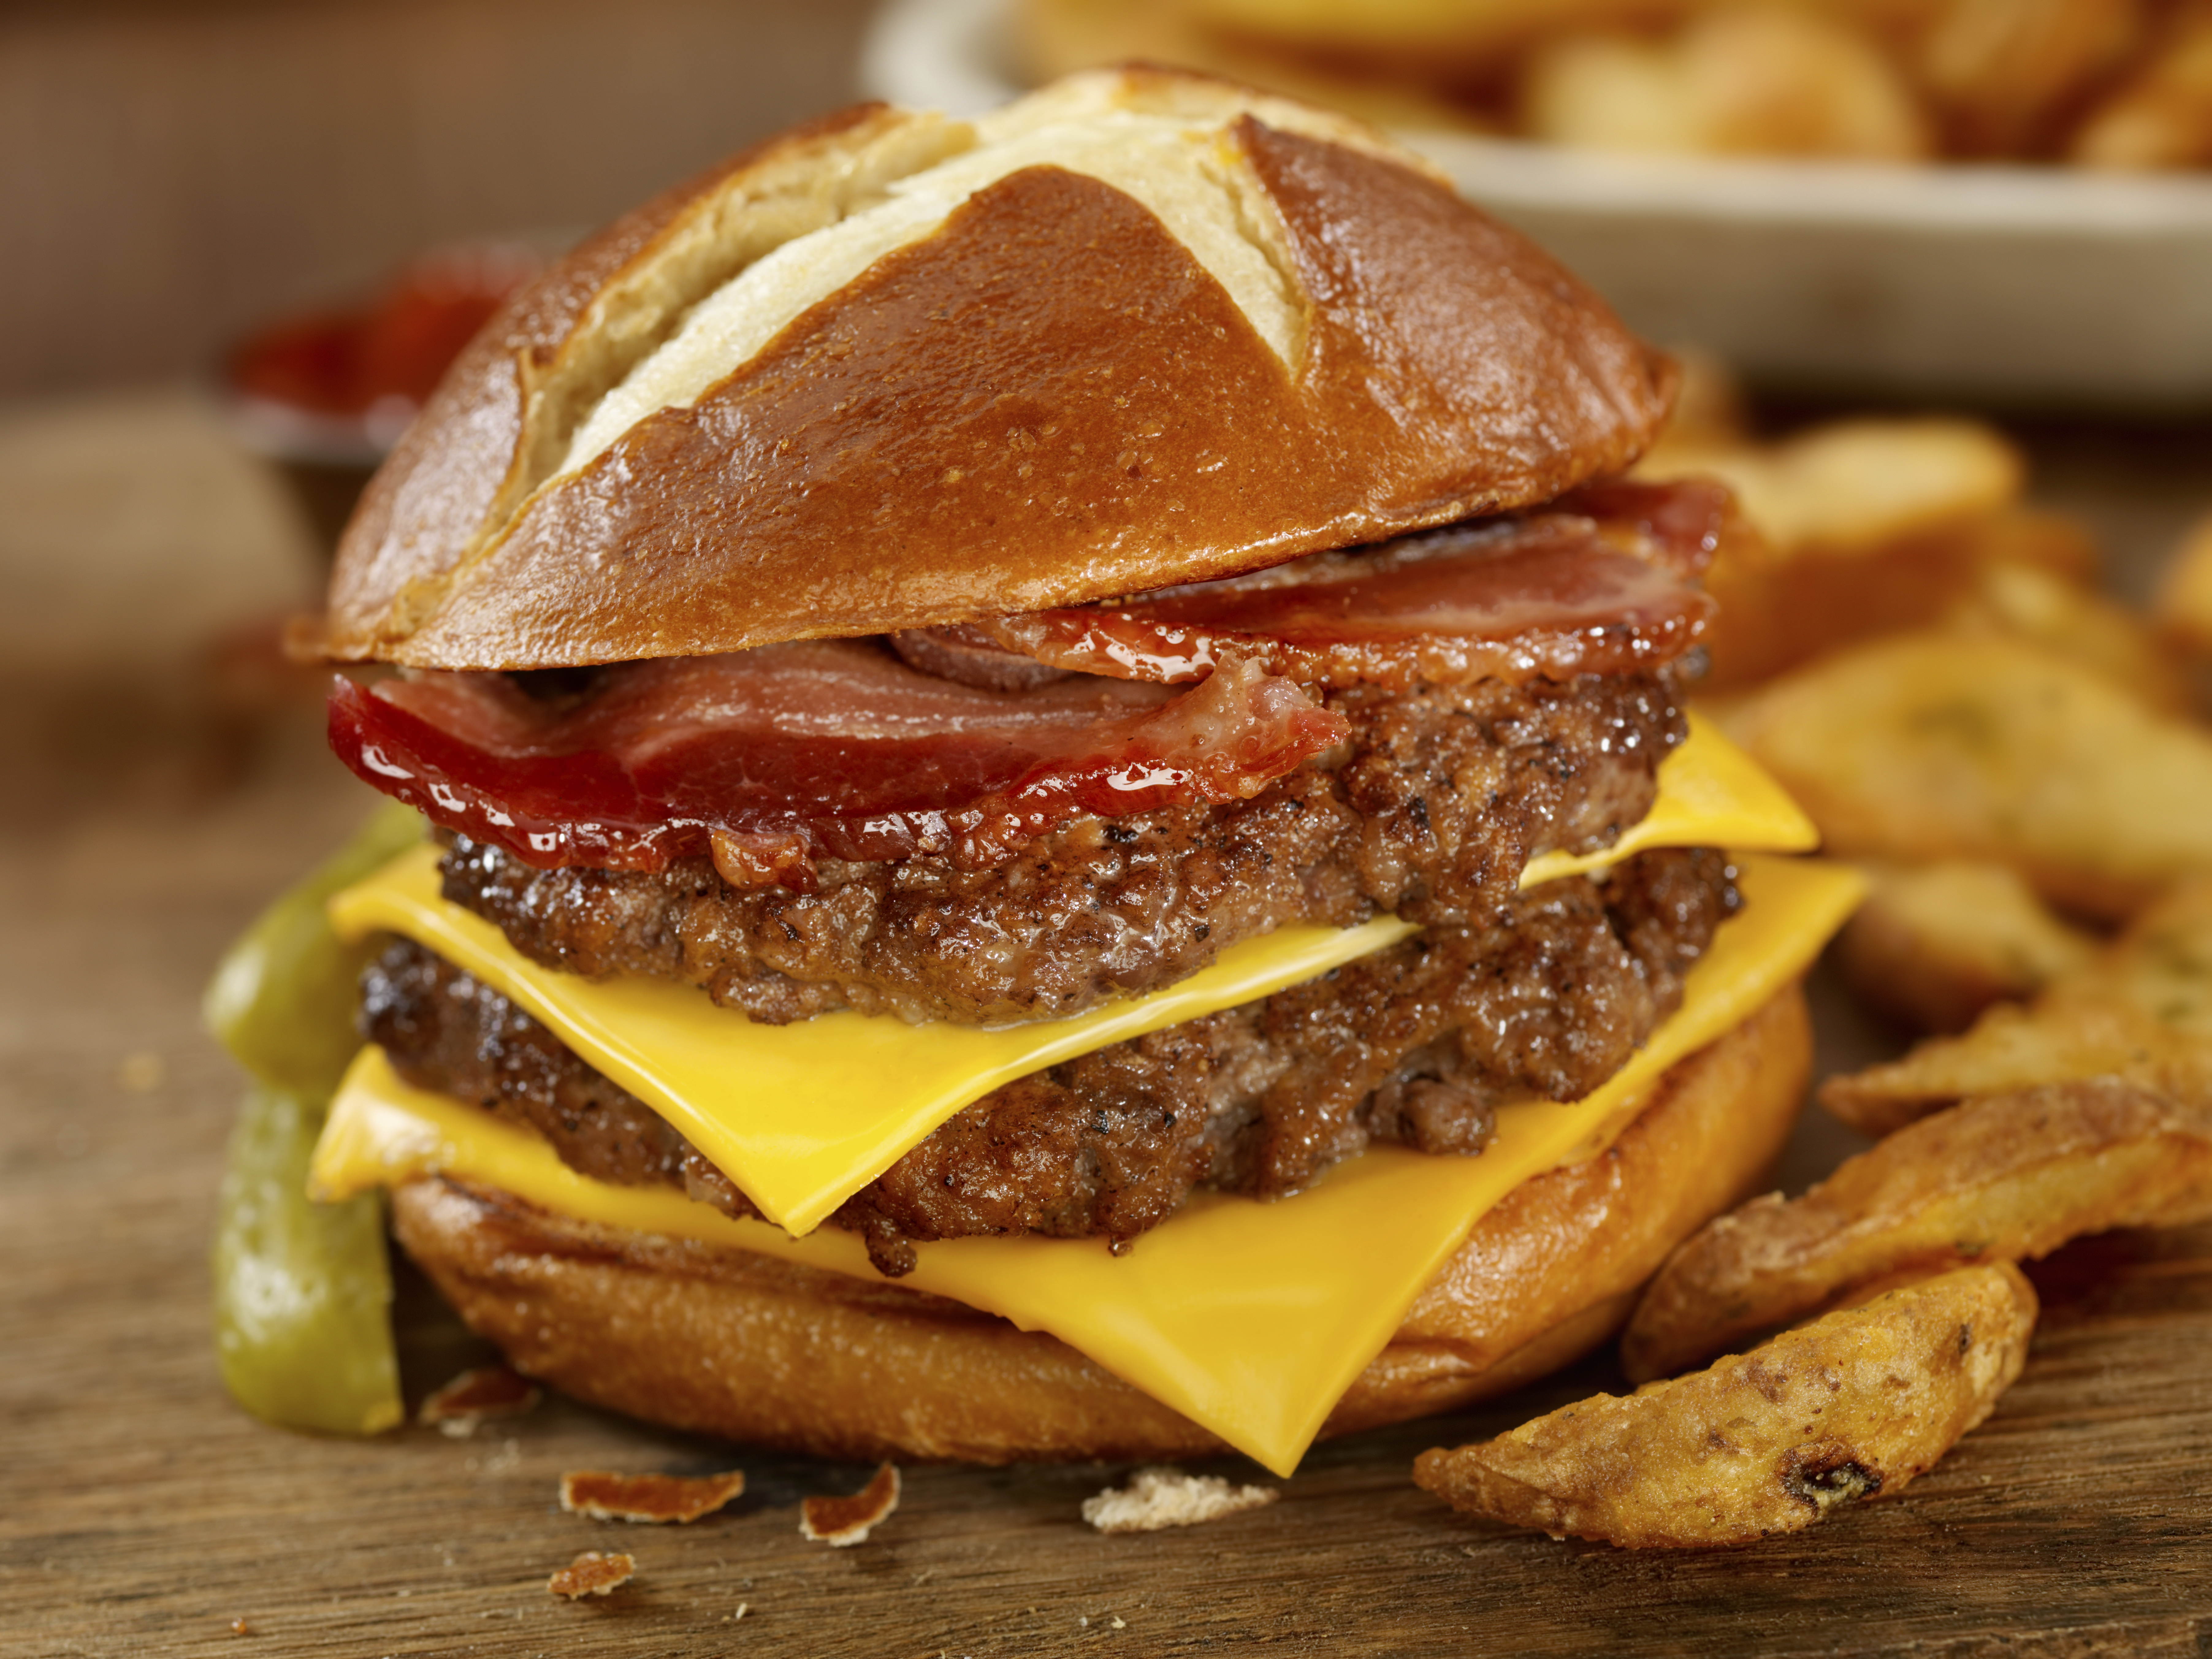 United Kingdom Man Changes Name to Bacon Double Cheeseburger | Time